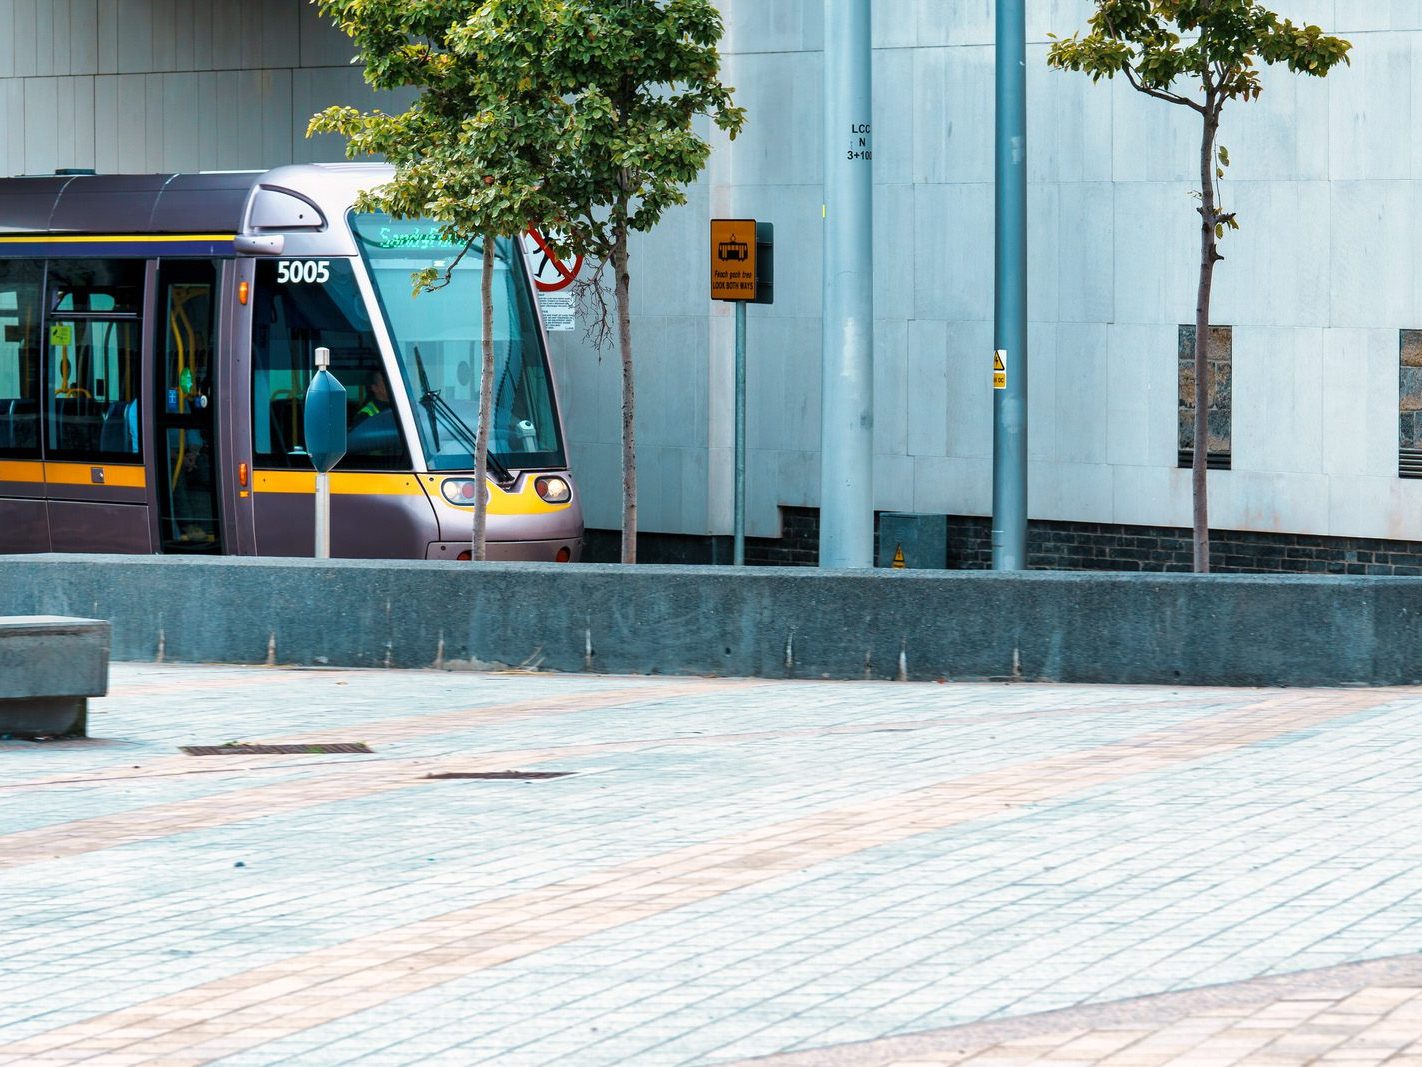 PUBLIC TRANSPORT AT BROADSTONE [RANDOM IMAGES OF LUAS TRAMS ARRIVING AND LEAVING] 004